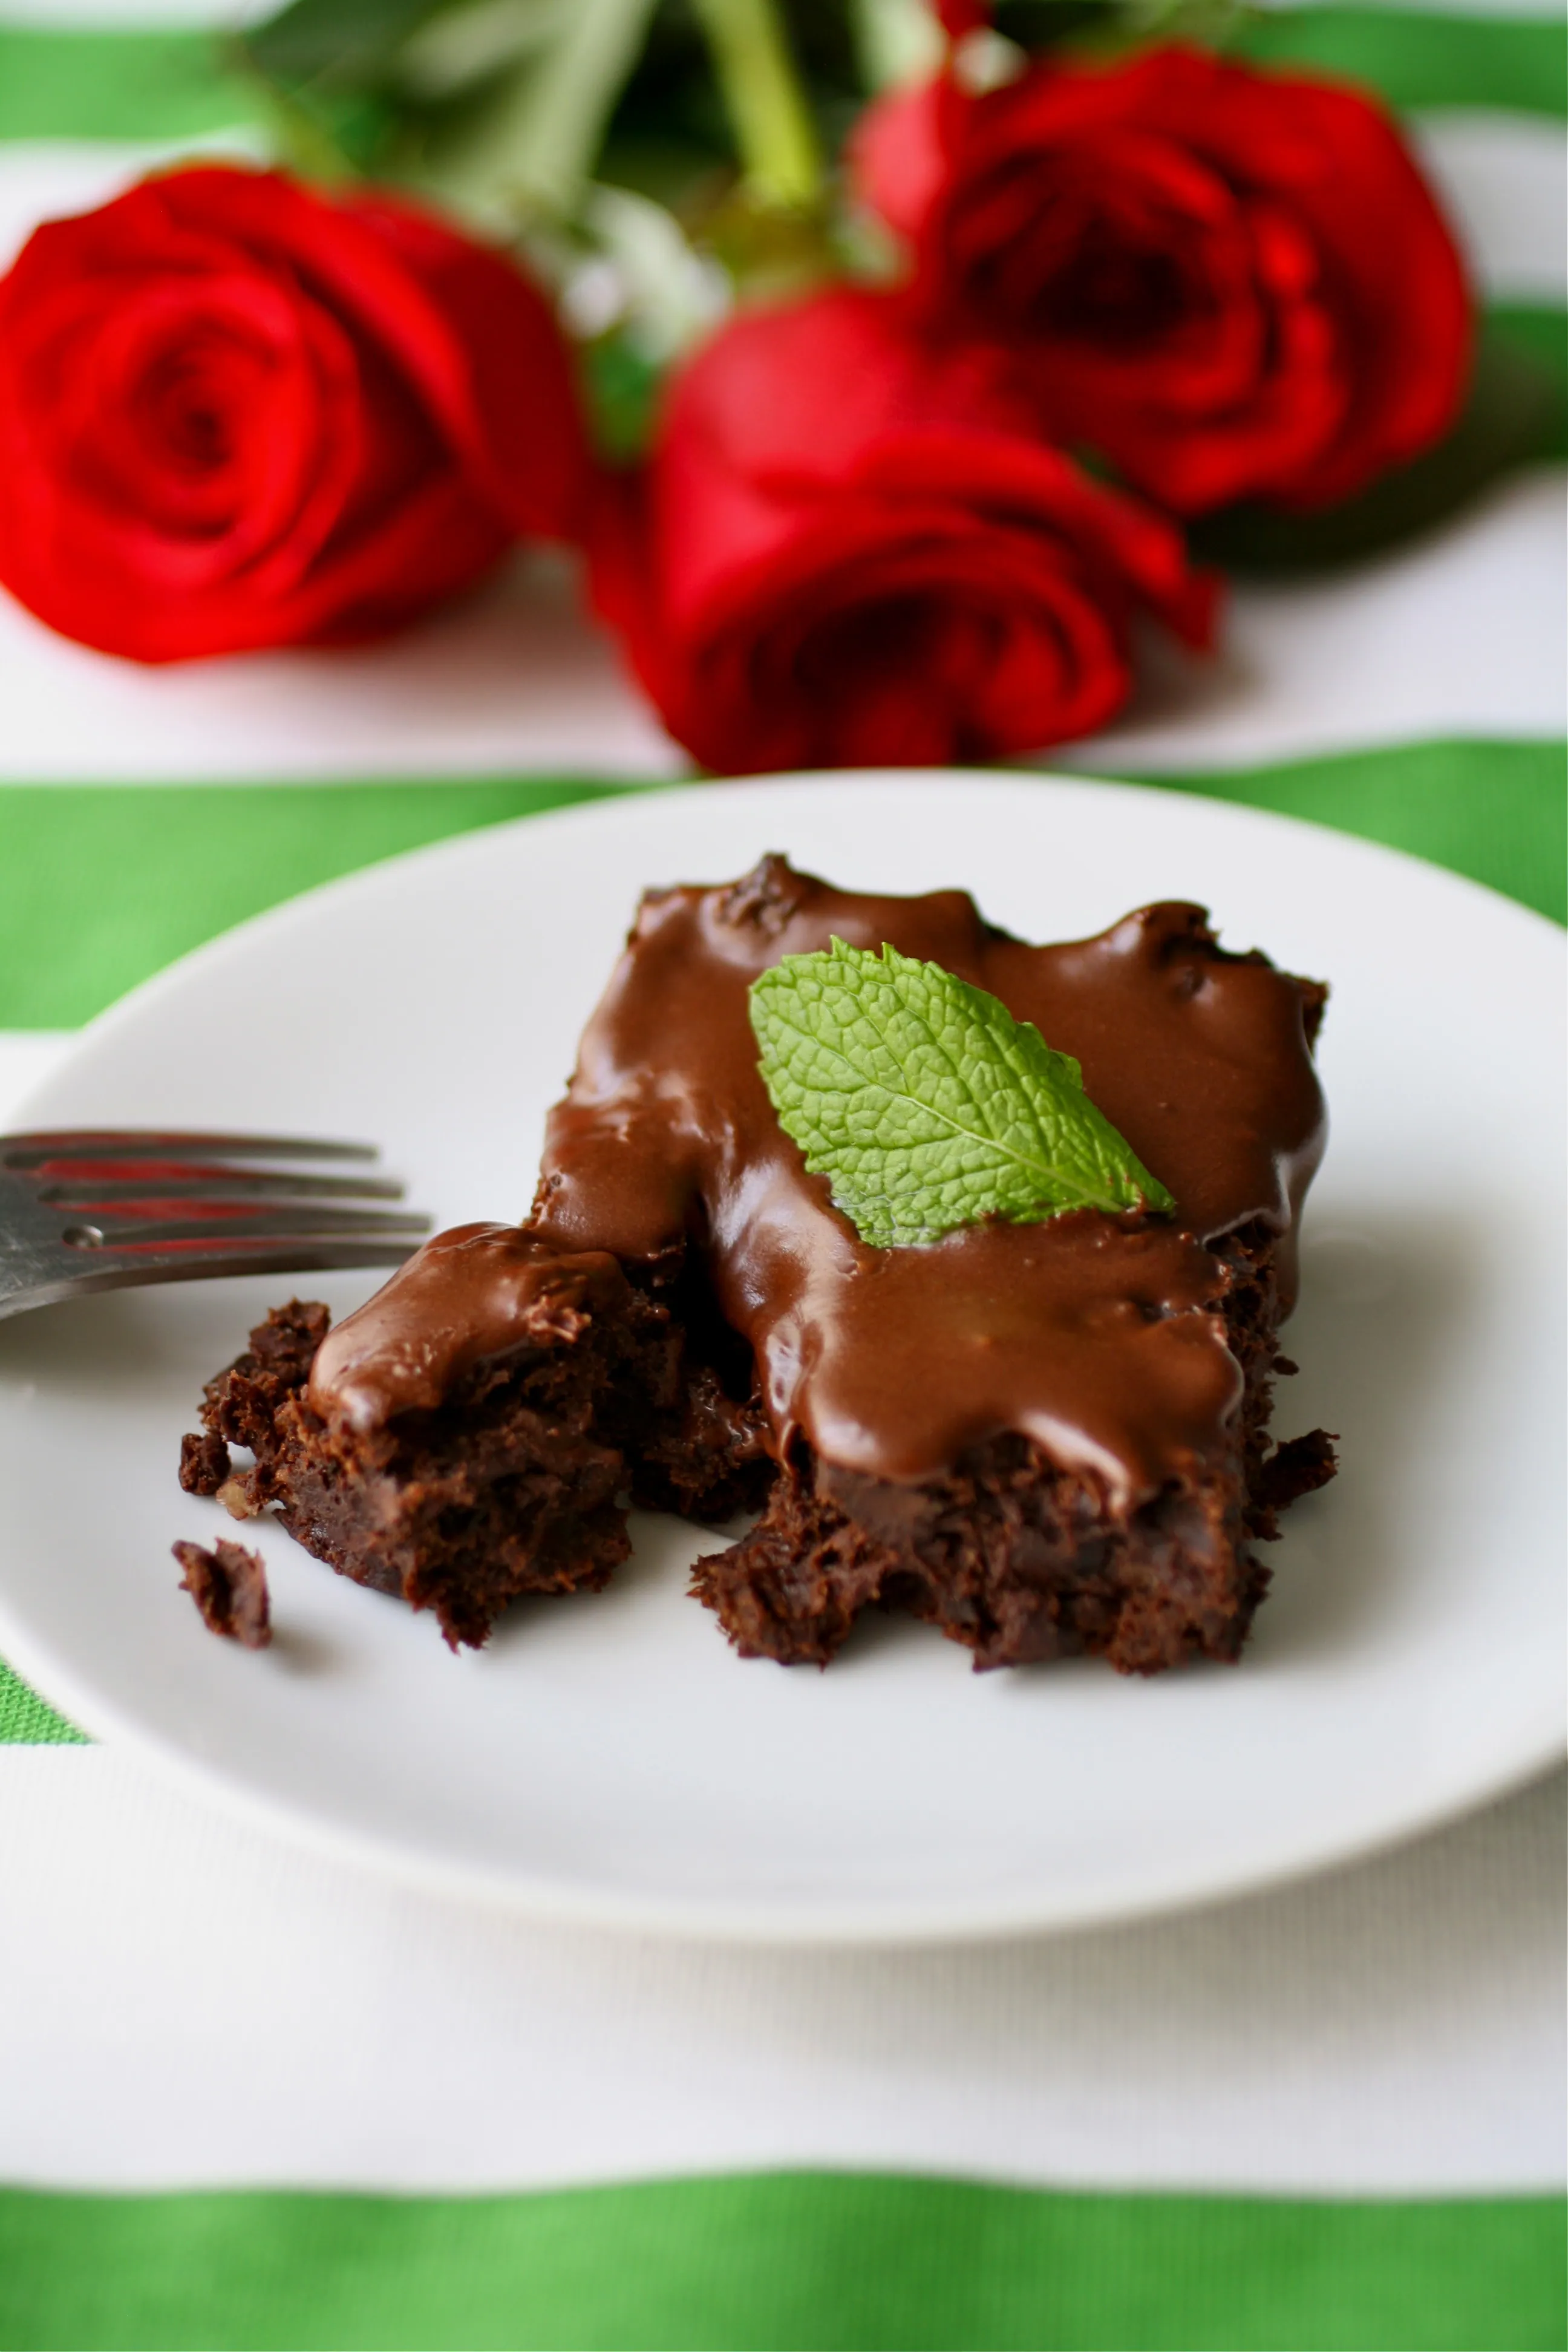 Frosted Mint Julep Black Bean Brownies (dairy free)